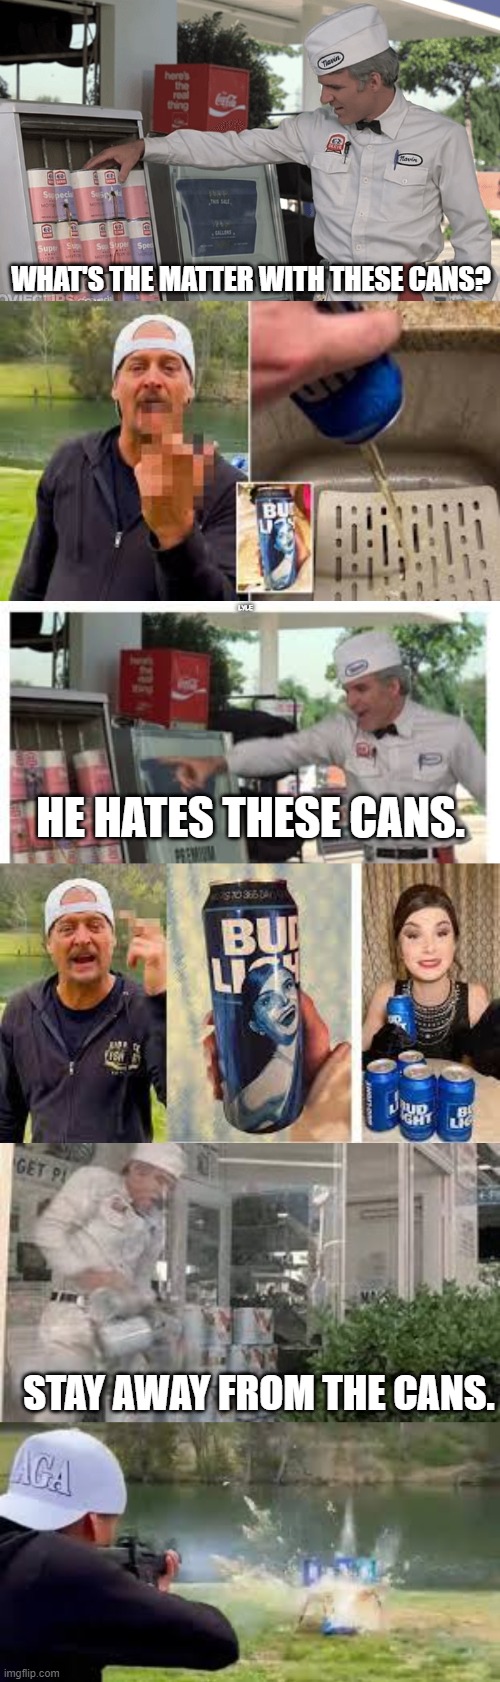 Cans | WHAT'S THE MATTER WITH THESE CANS? LYLE; HE HATES THESE CANS. STAY AWAY FROM THE CANS. | image tagged in kid rock,jerk | made w/ Imgflip meme maker